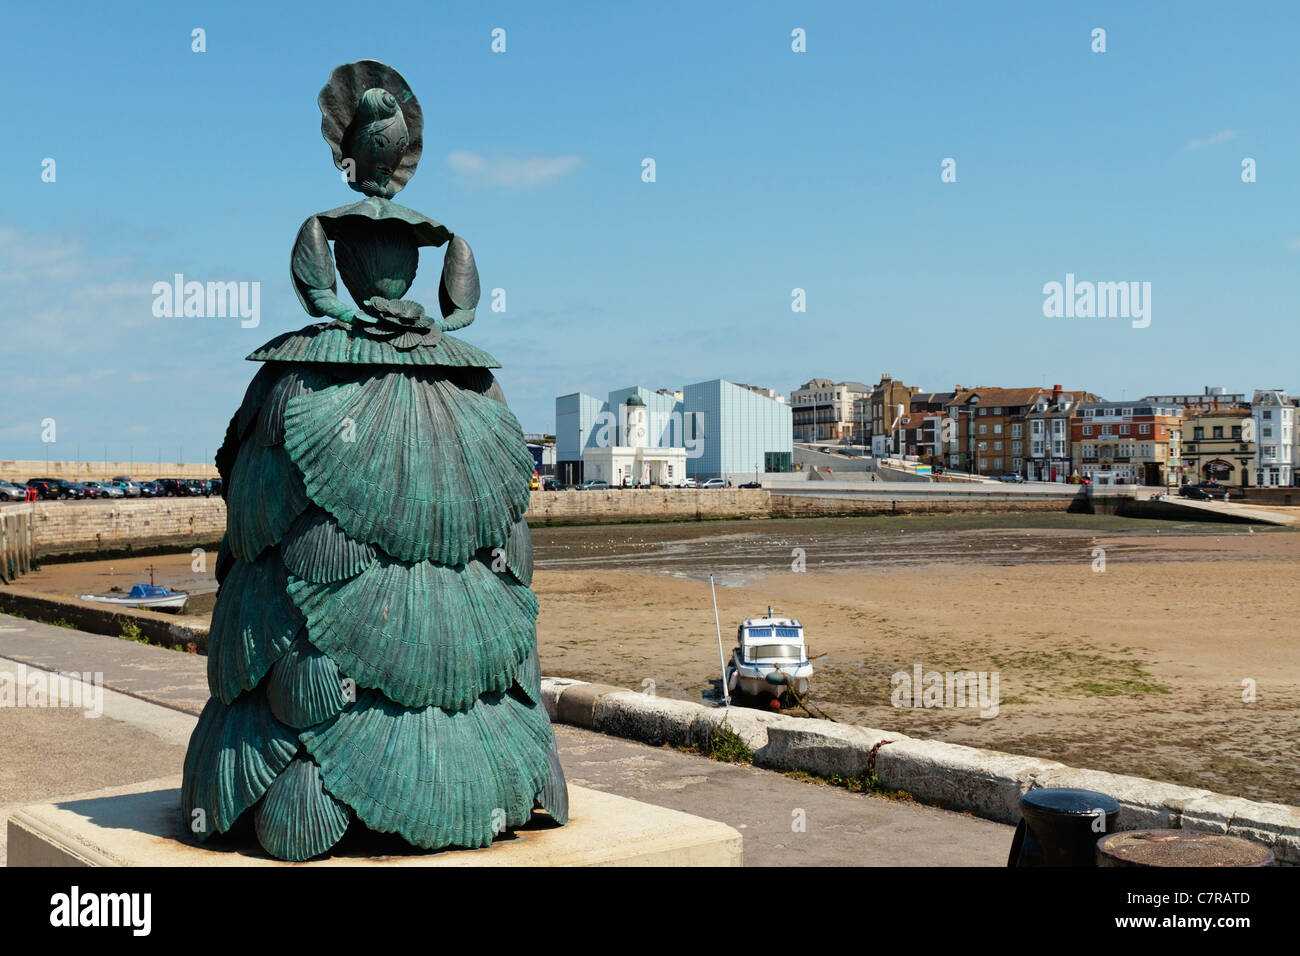 Mrs Booth statue, The Shell Lady of Margate, Turner Contemporary Art Gallery in background, The Stone Pier, Margate, Kent, England, United Kingdom Stock Photo